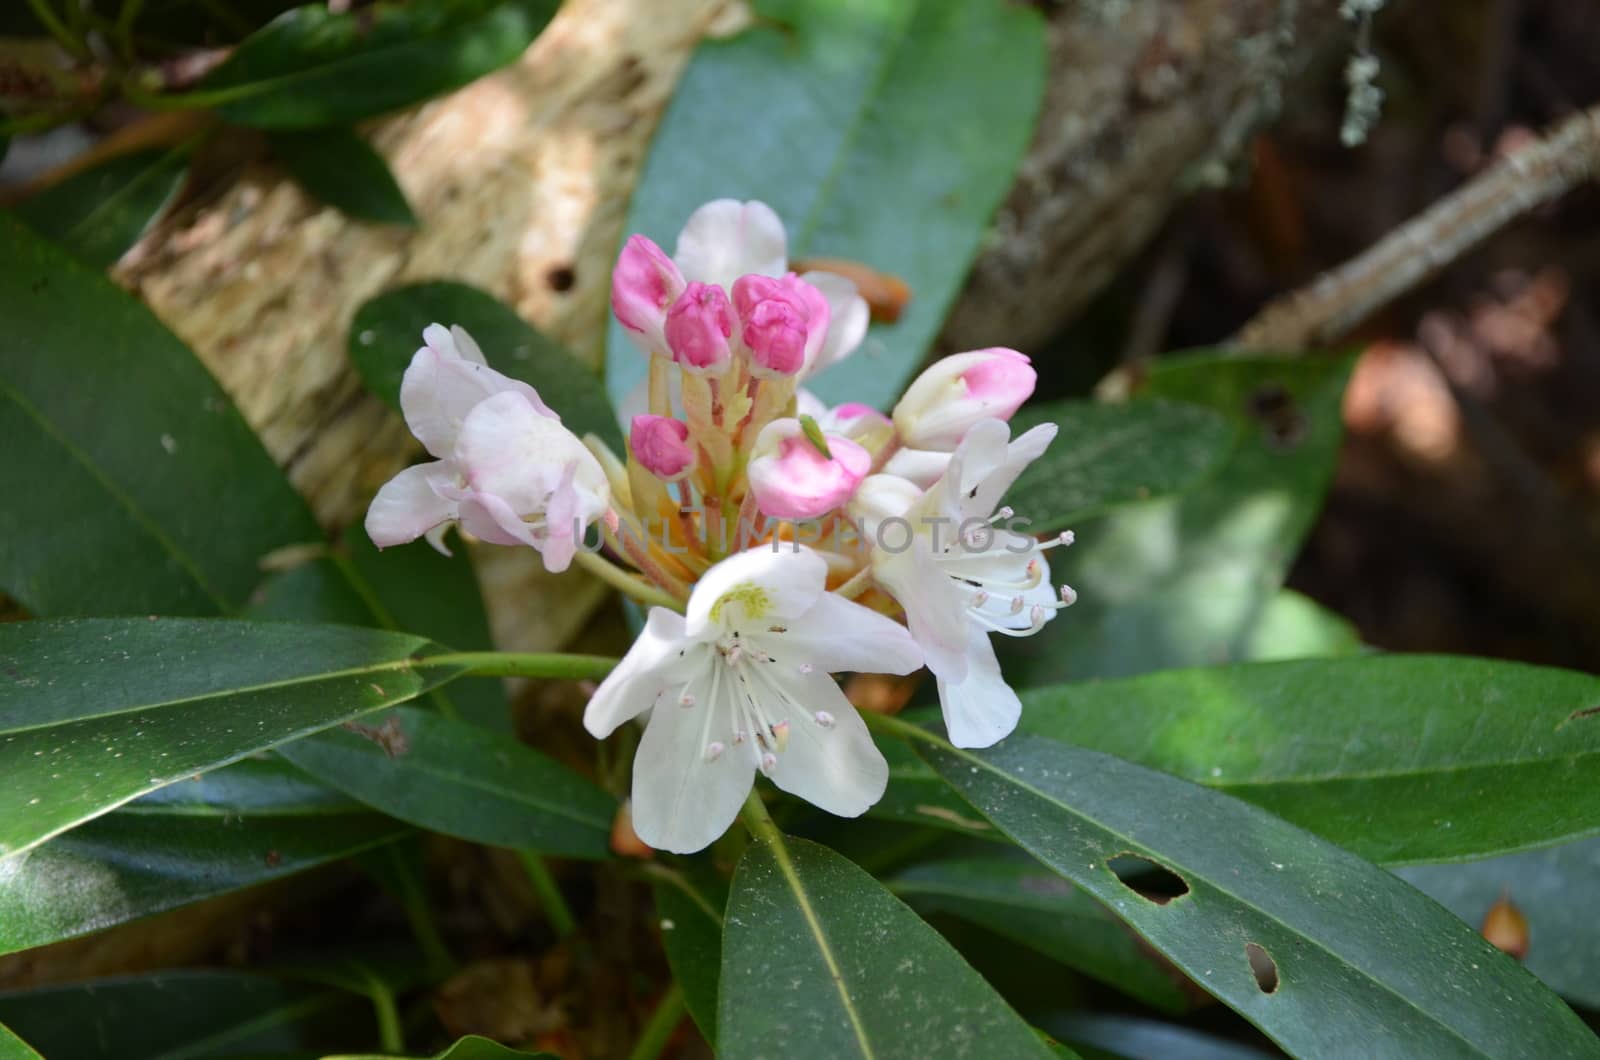 rhododendron by northwoodsphoto